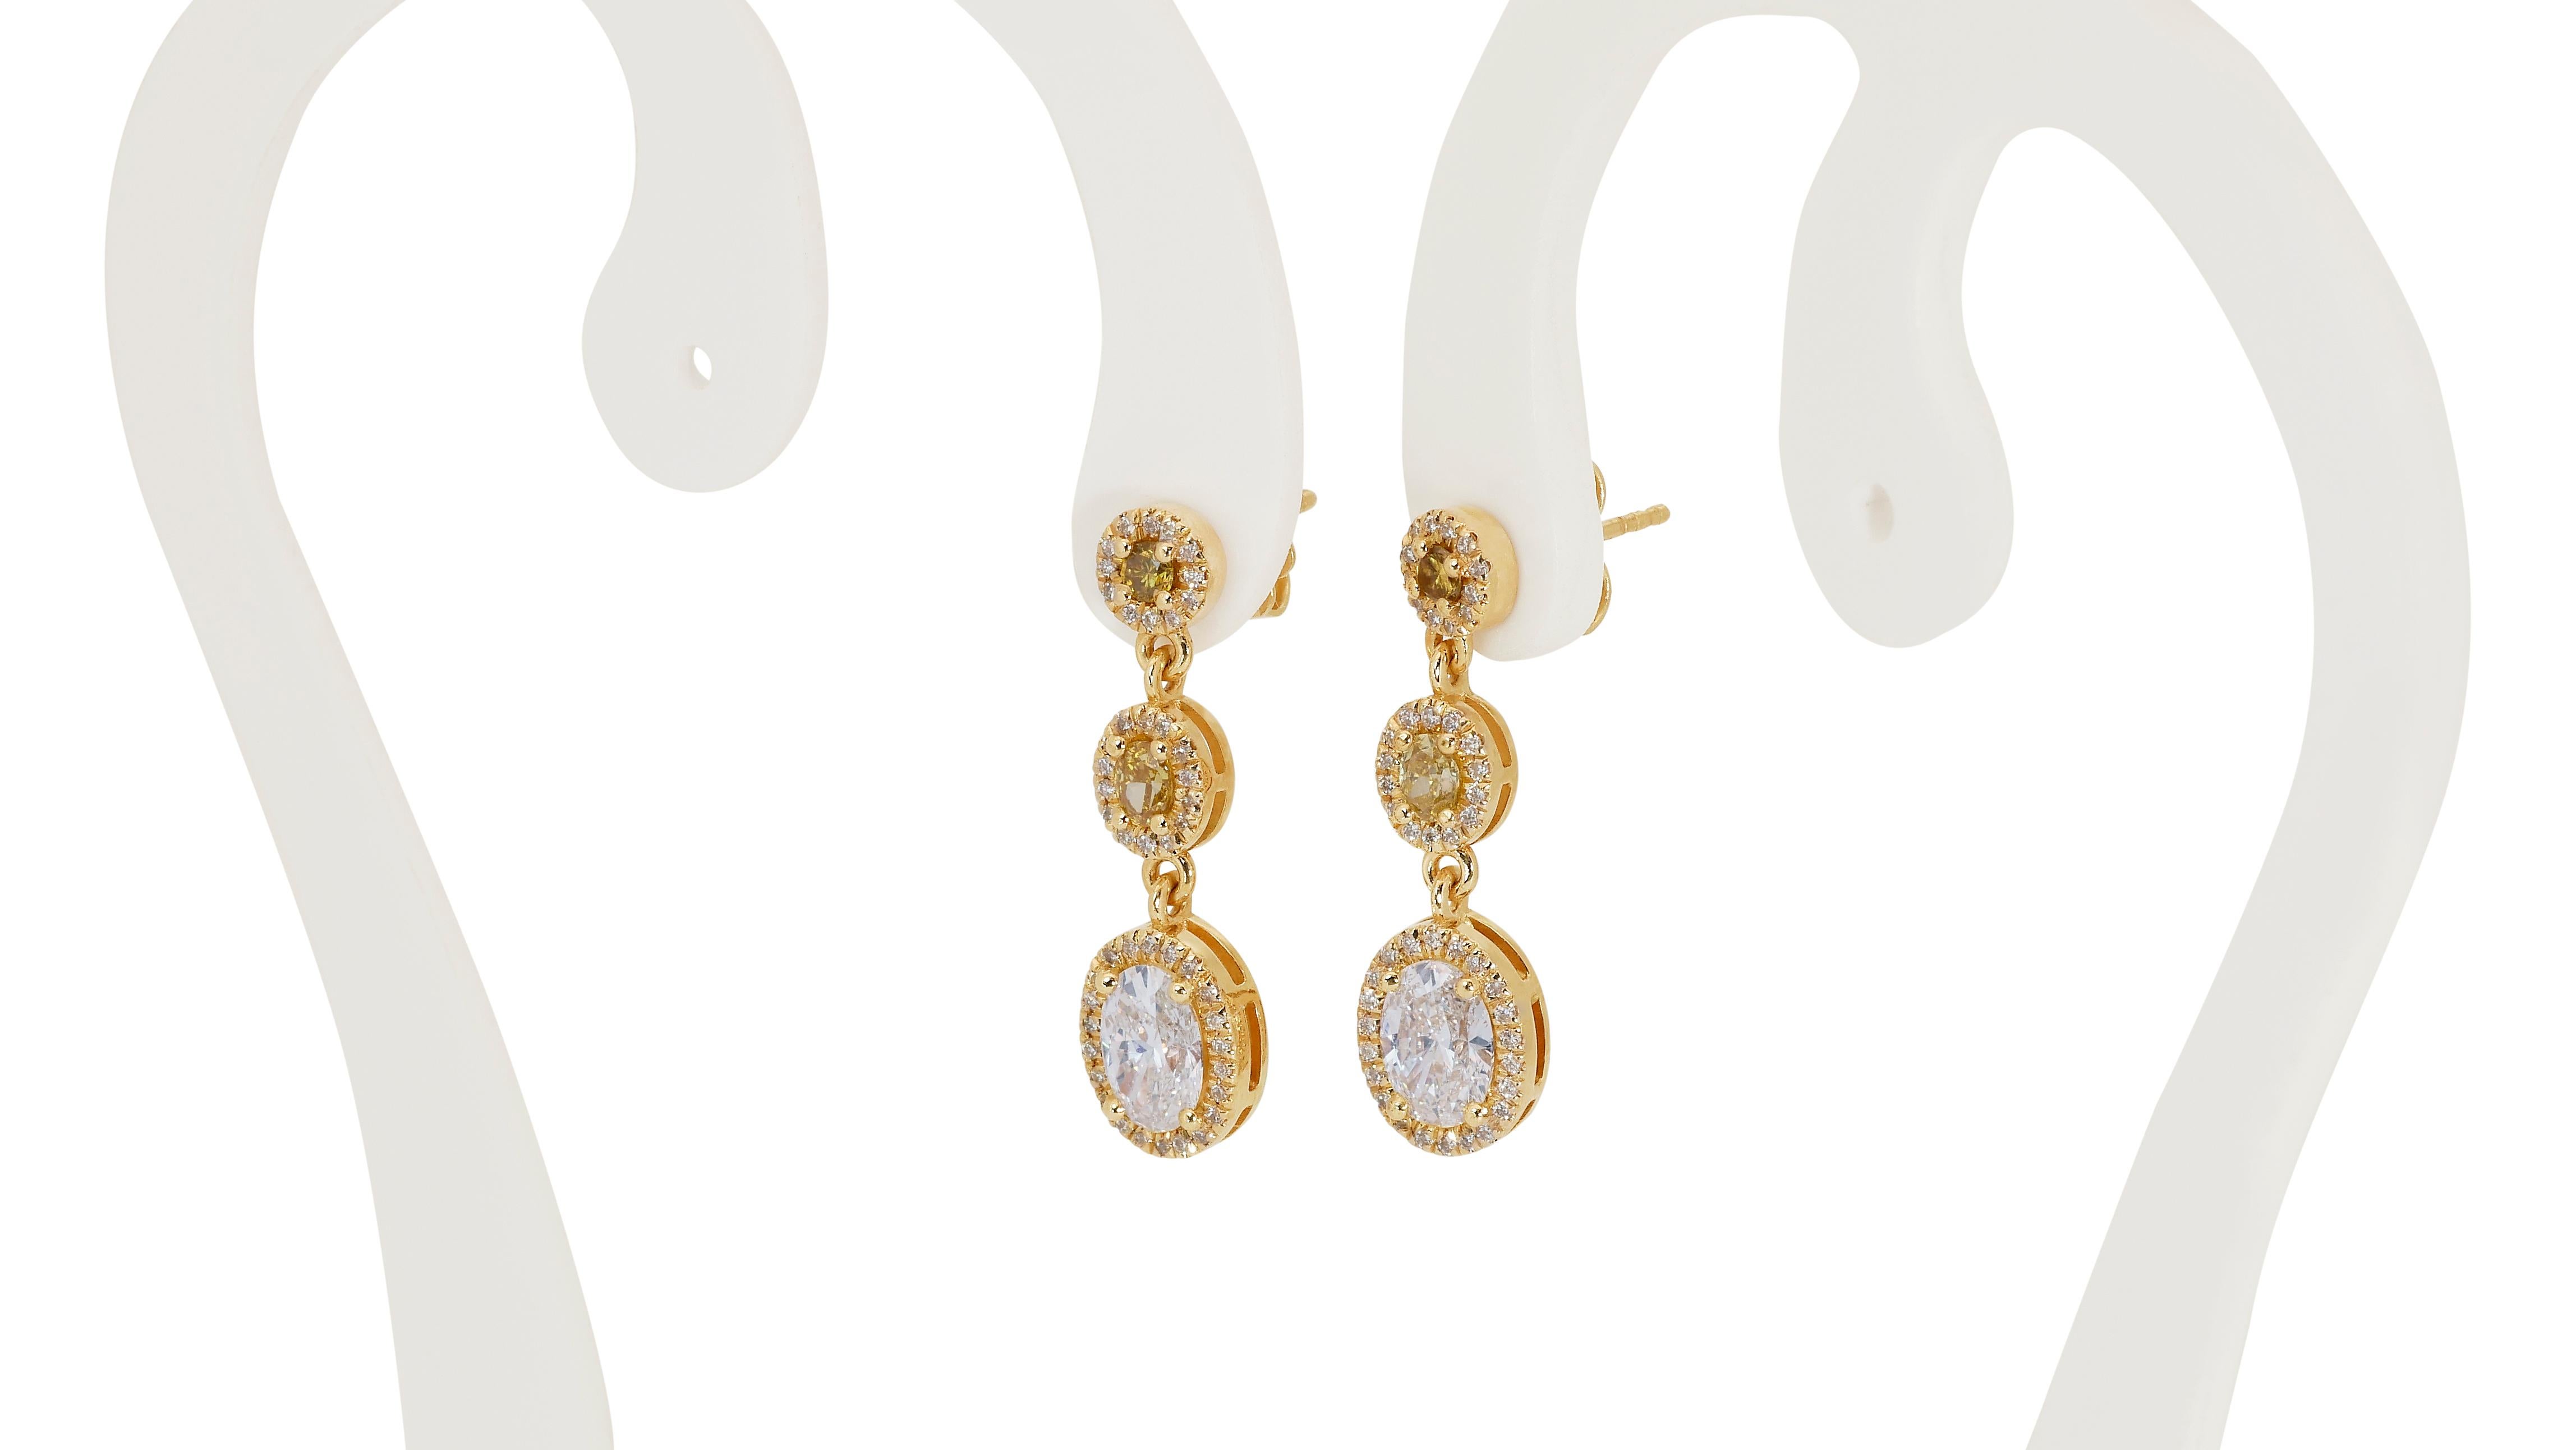 18k Yellow Gold Fancy Drop Earrings w/ 2.18 Carat Natural Diamonds IGI Cert In New Condition For Sale In רמת גן, IL